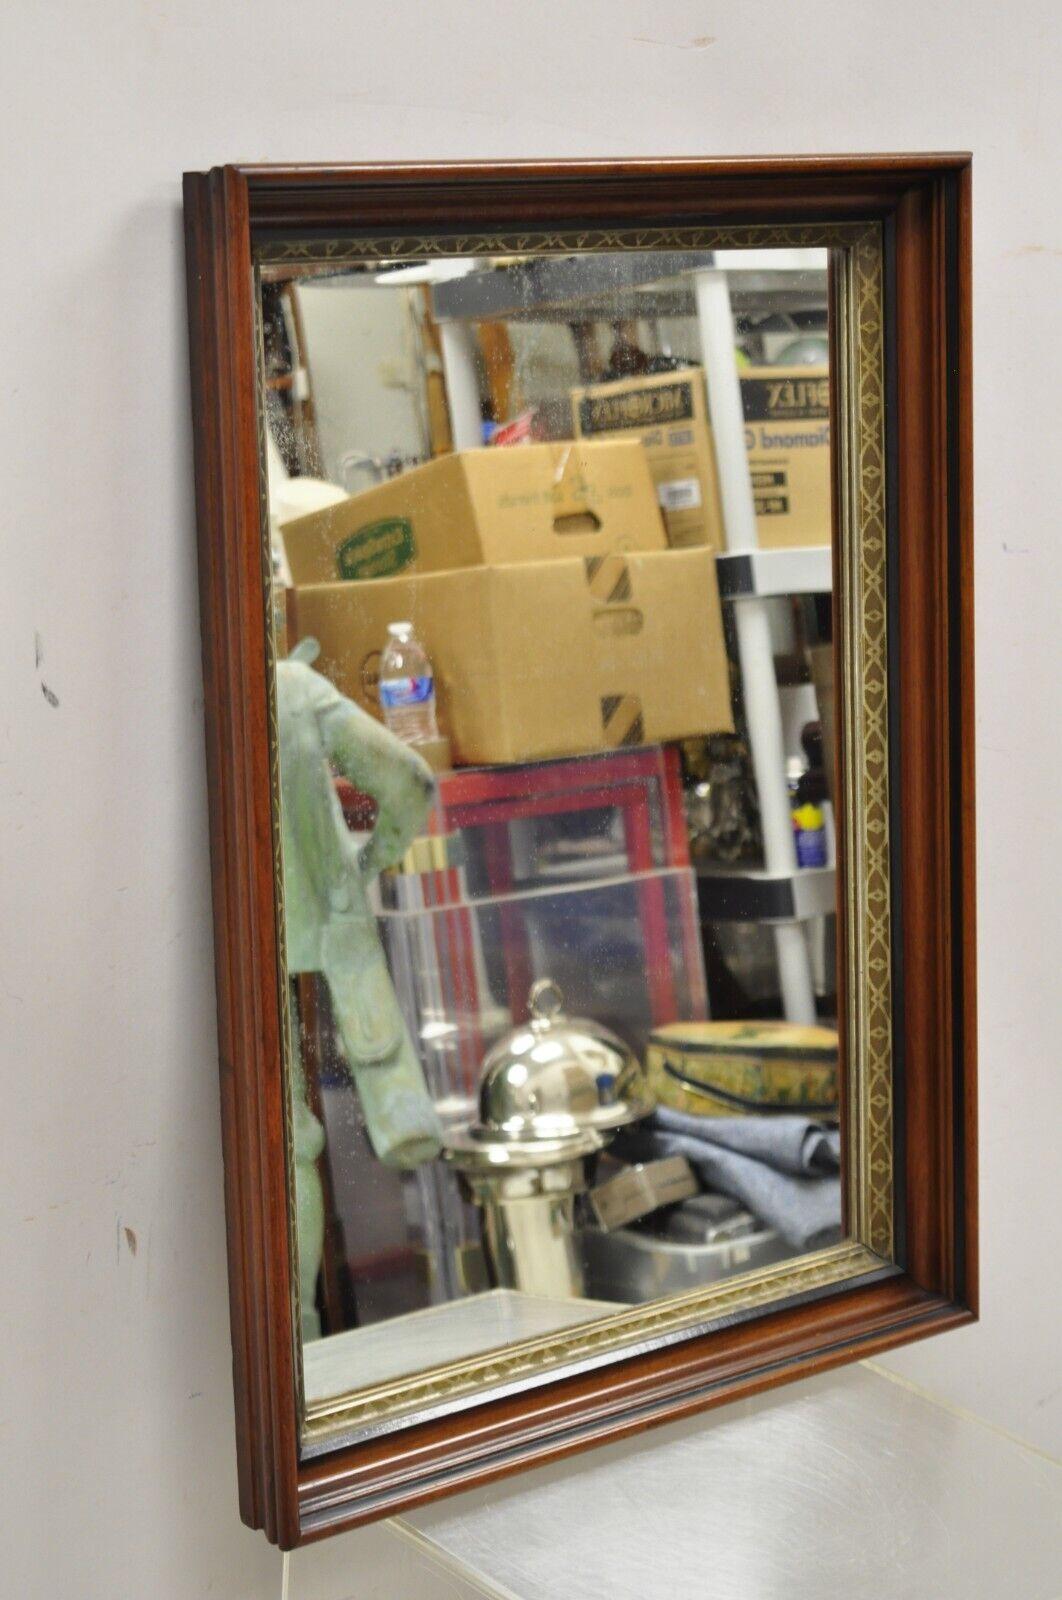 Antique Victorian Aesthetic Mahogany Deep Frame Shadow Box Wall Mirror 31 x 23. Item, features a deep shadow box, solid mahogany frame, gold gilt details, beautiful wood grain, very nice antique item, quality craftsmanship, great style and form.